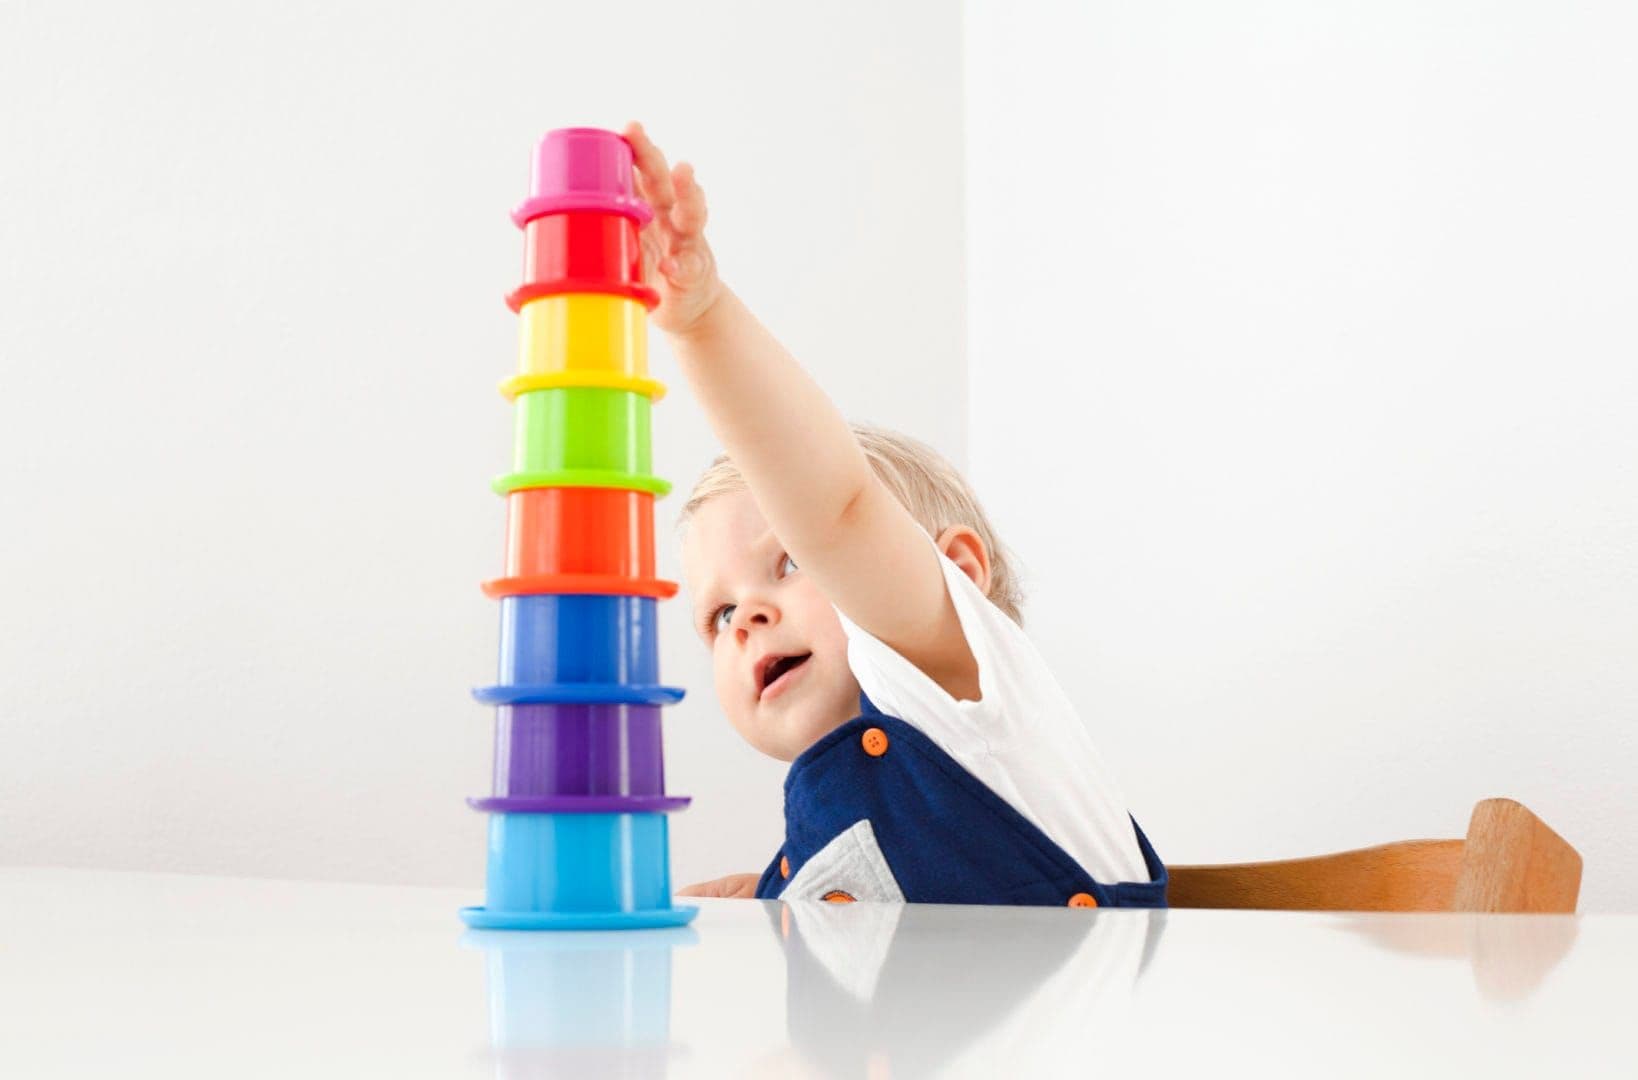 The 8 best toys for 6-month-old babies to help them learn and develop